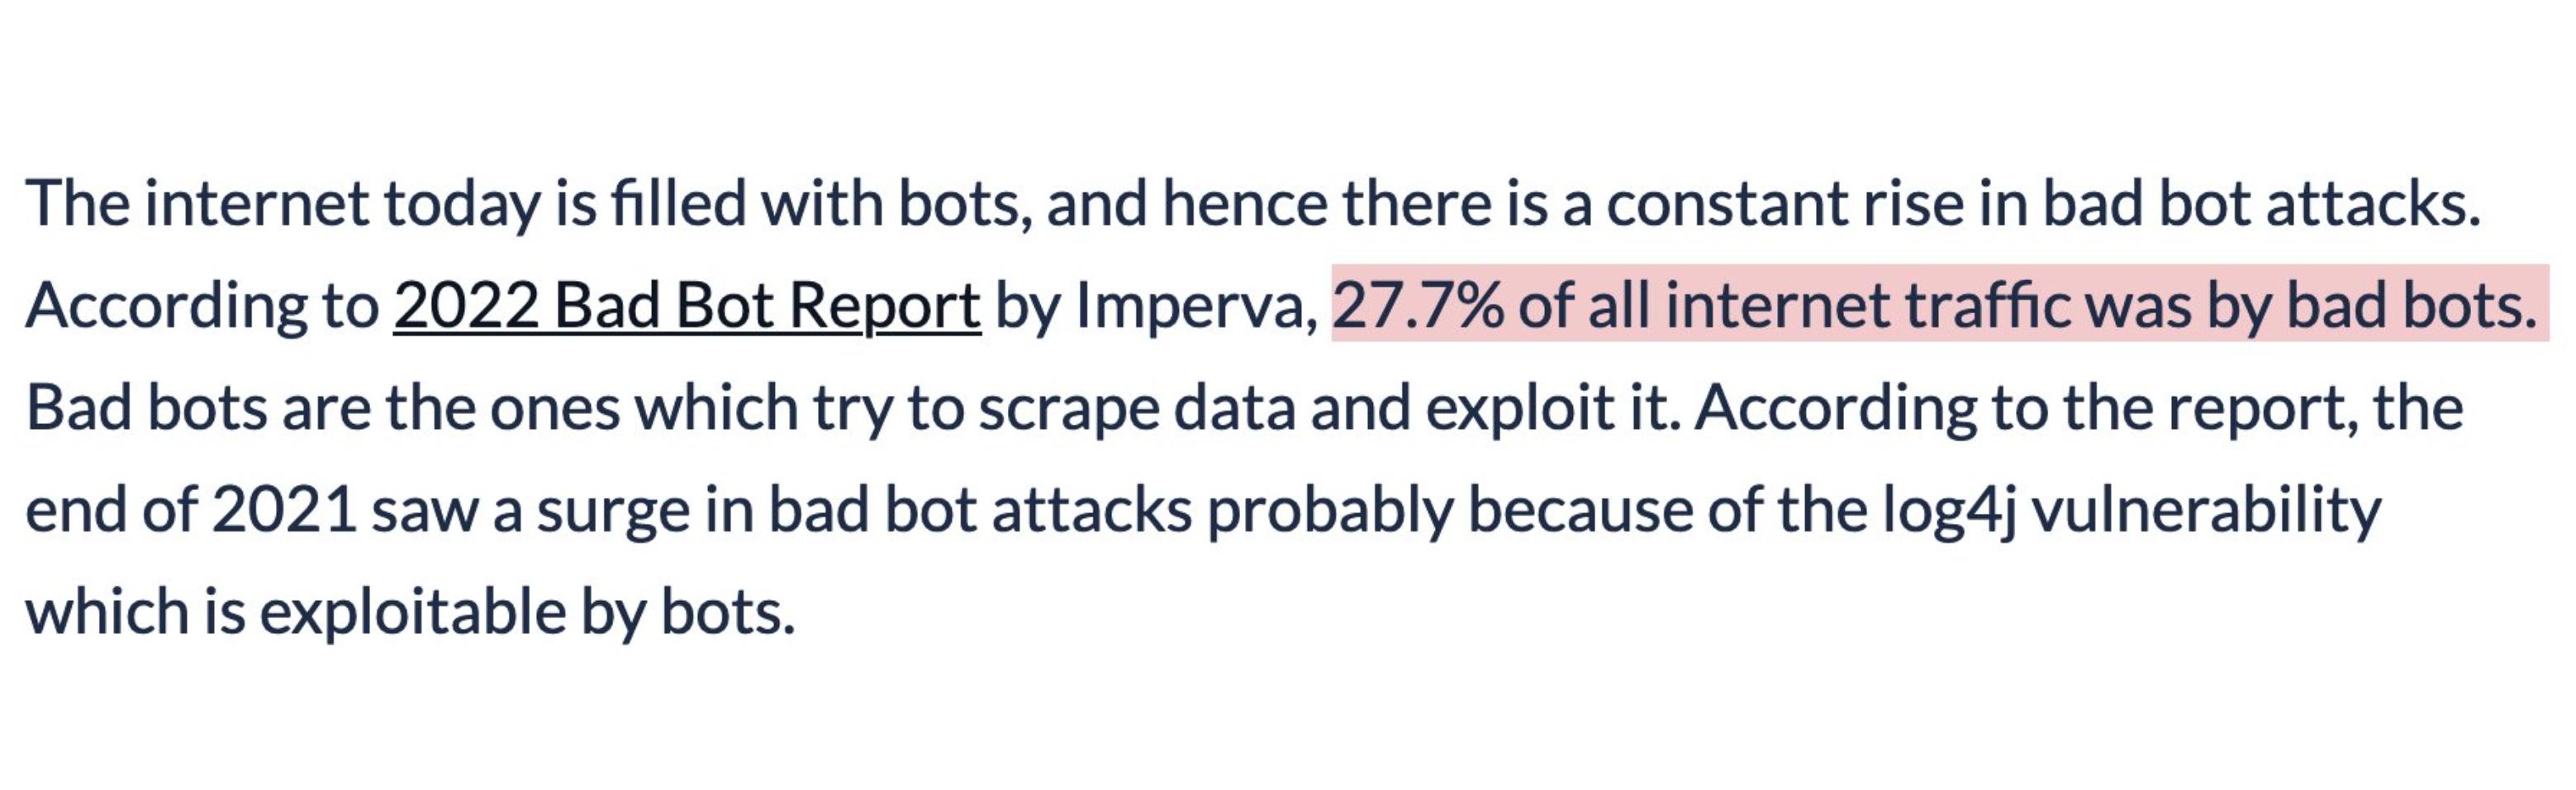 The internet today is filled with bots, and hance there is a constant rise in bad bot attacks. According to 2022 Bad Bot Report by Imperva, 27.7% of all internet traffic was by bad bots. Bots are the ones which try to scrape data and exploit it. According to the report, the end of 2021 saw a surge in bad bot attacks probably because of the log4j vulnerability which is exploitable by bots.